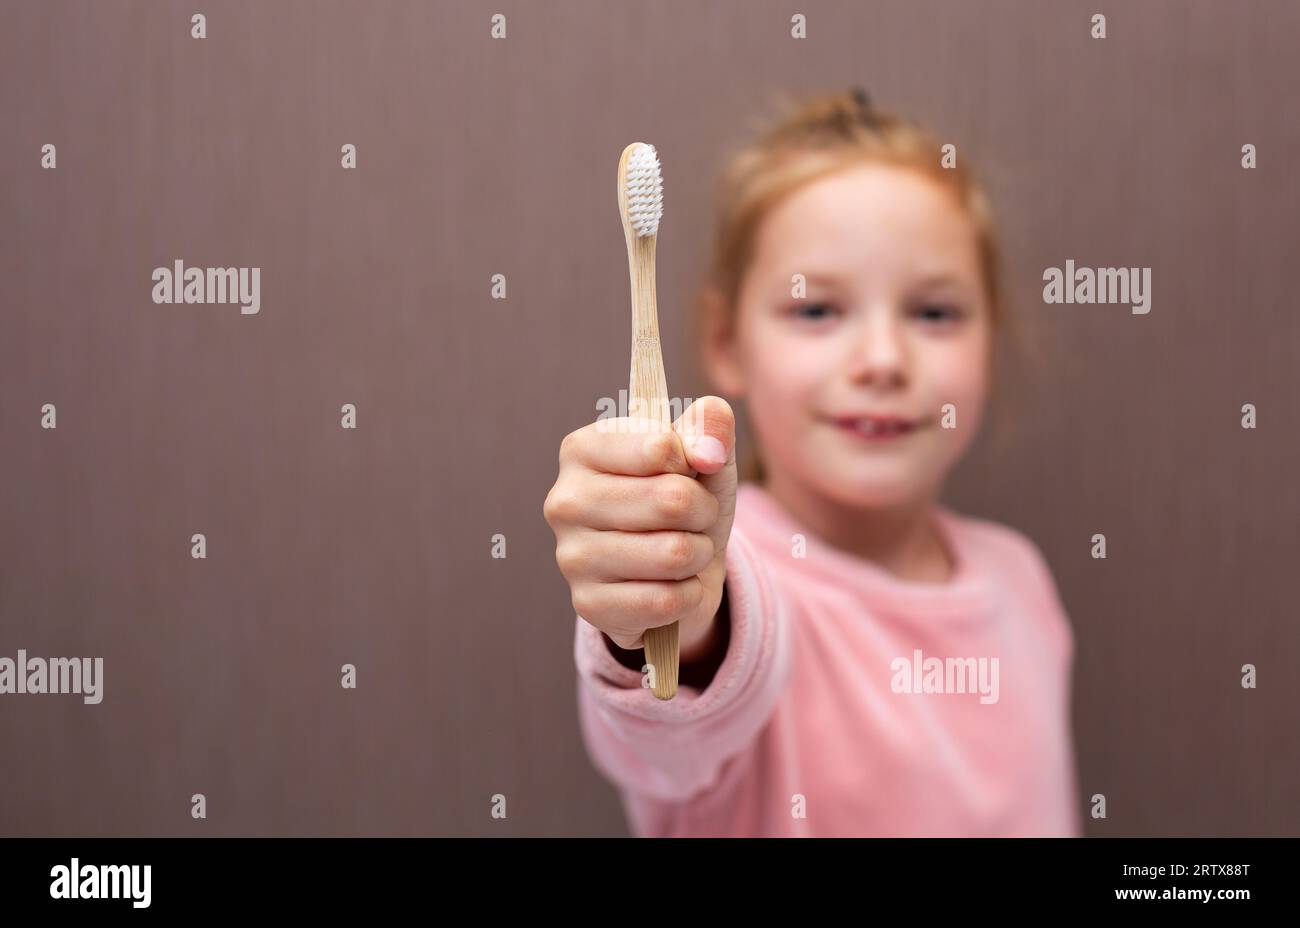 Little girl brushing her teeth. Girl with a toothbrush. Oral hygiene. Stock Photo